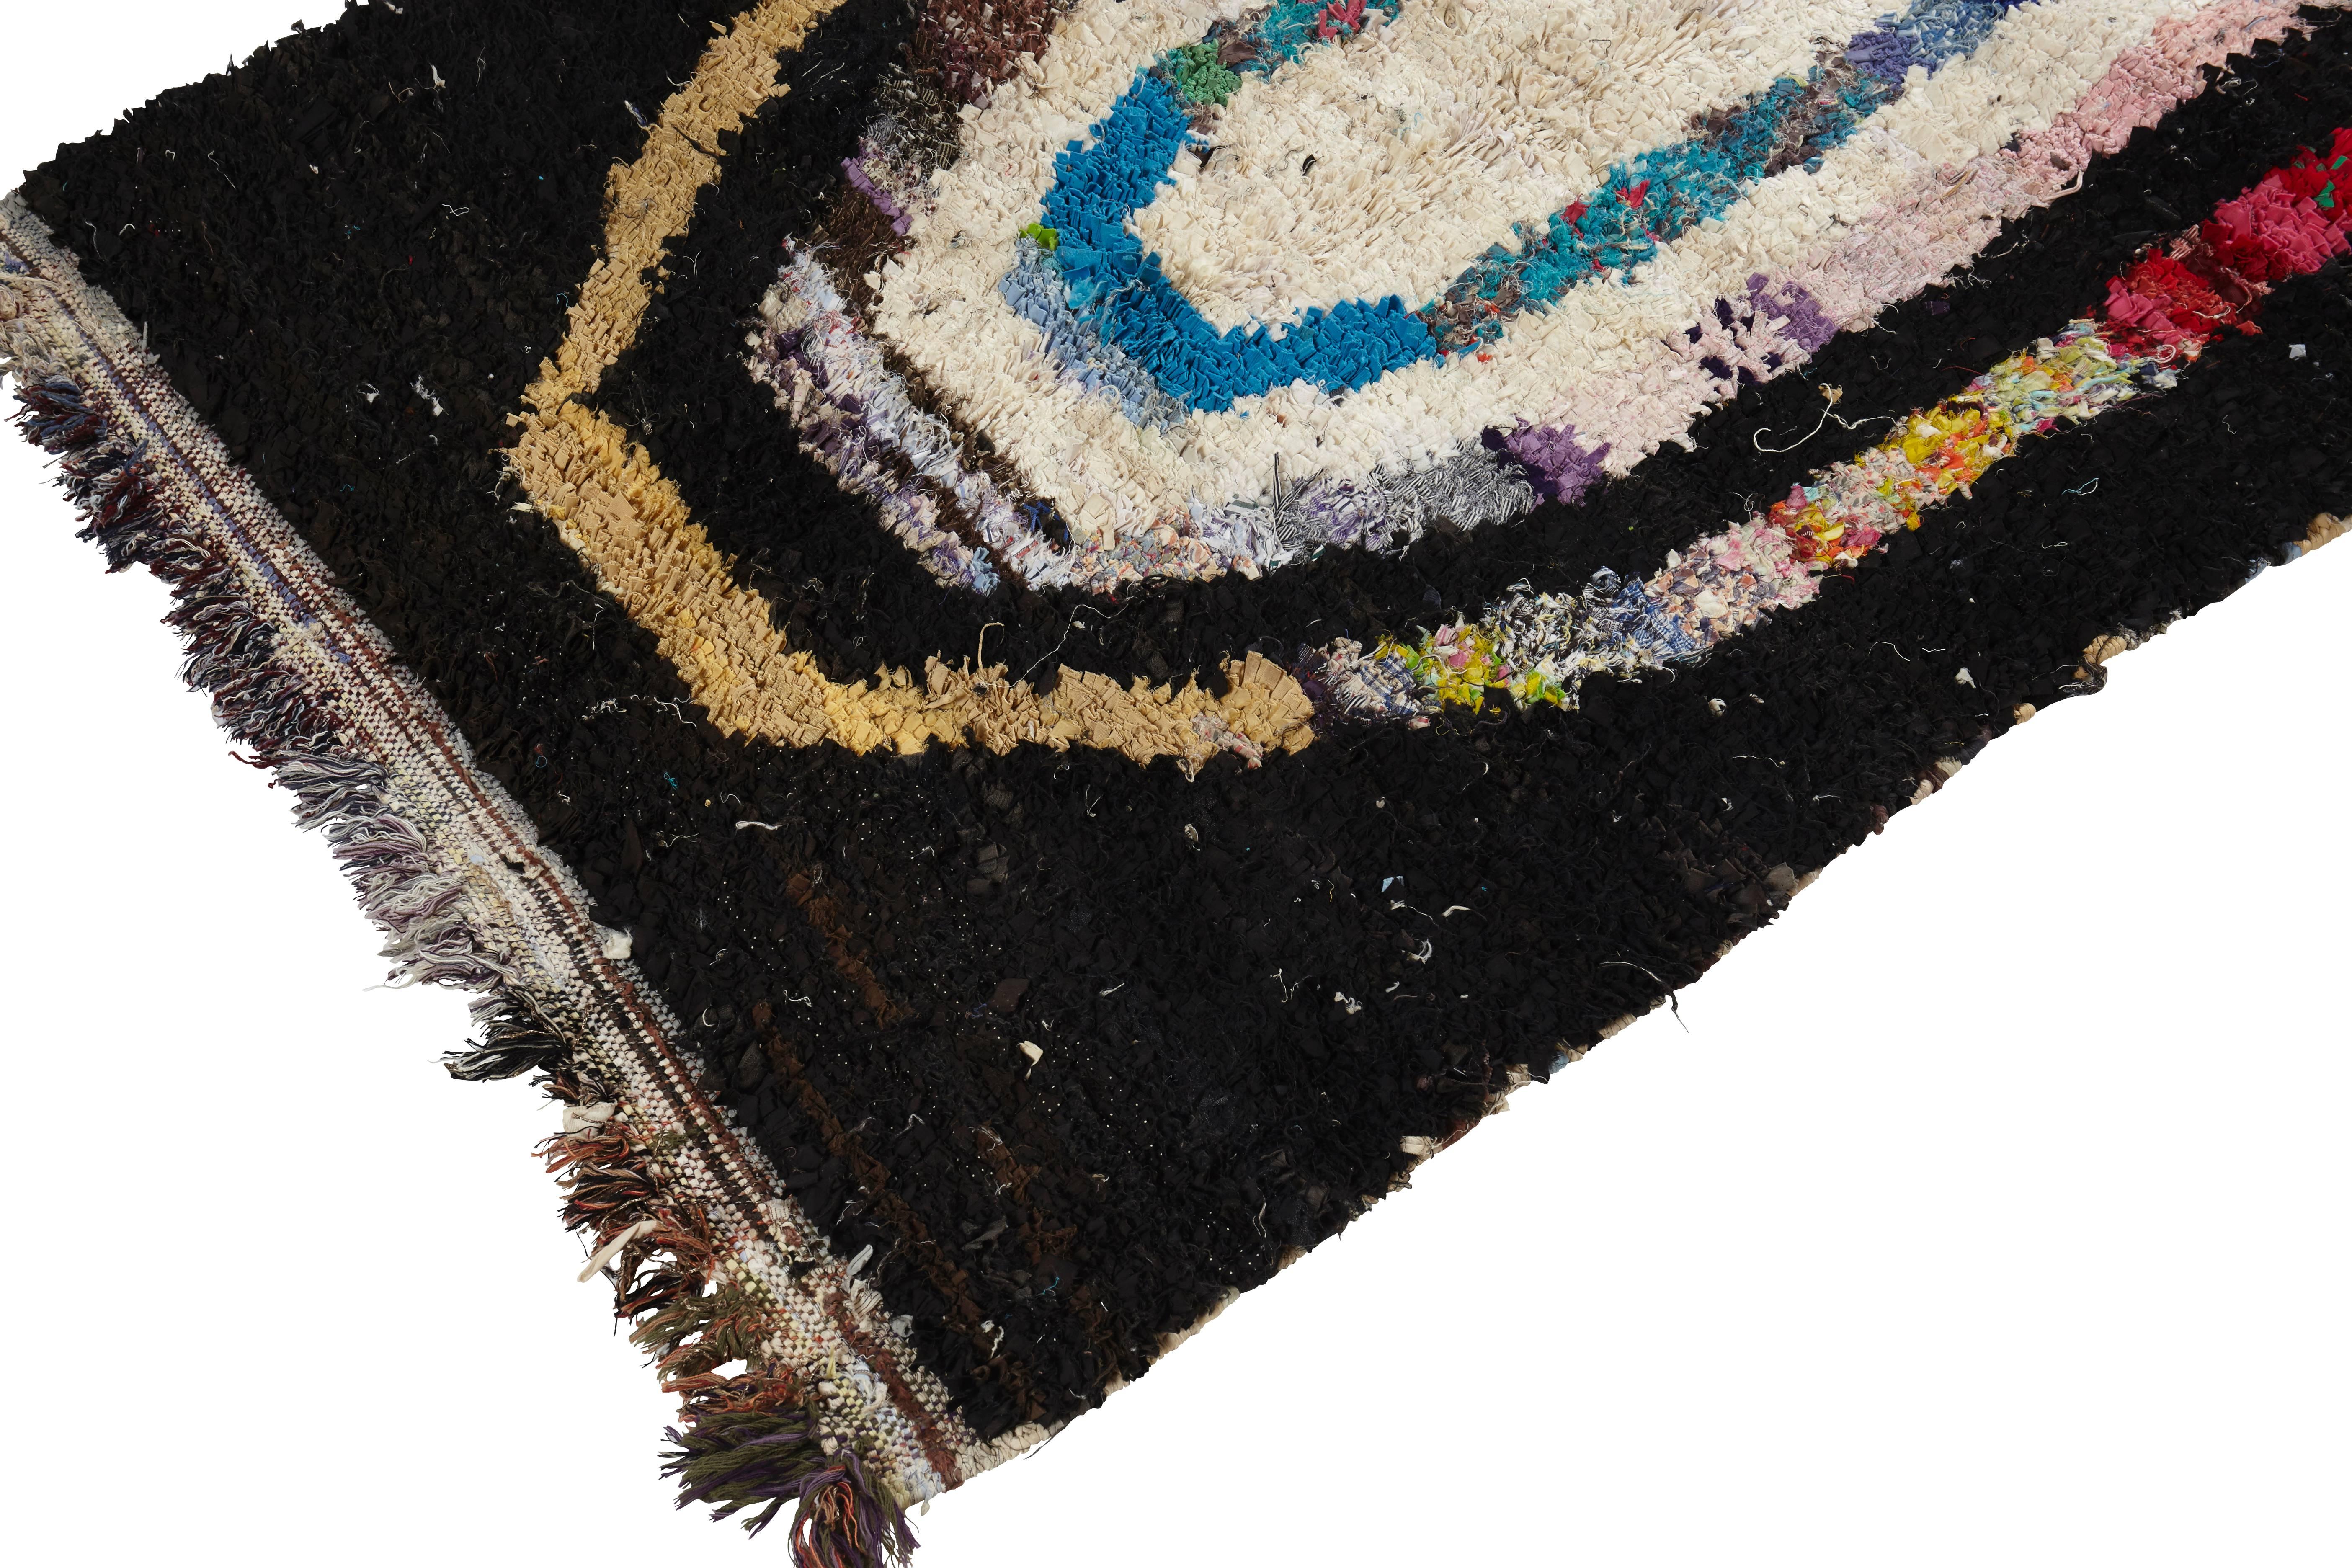 Boucherouite rug,
Ourika, Morocco,
late 20th century.
Synthetic fibres, rag rug.
Extremely rare motif.

Measures: 160 x 70cm.

This Boucherouite rug from the Ourika area of Morocco has been hand woven with found fabrics and rag to create